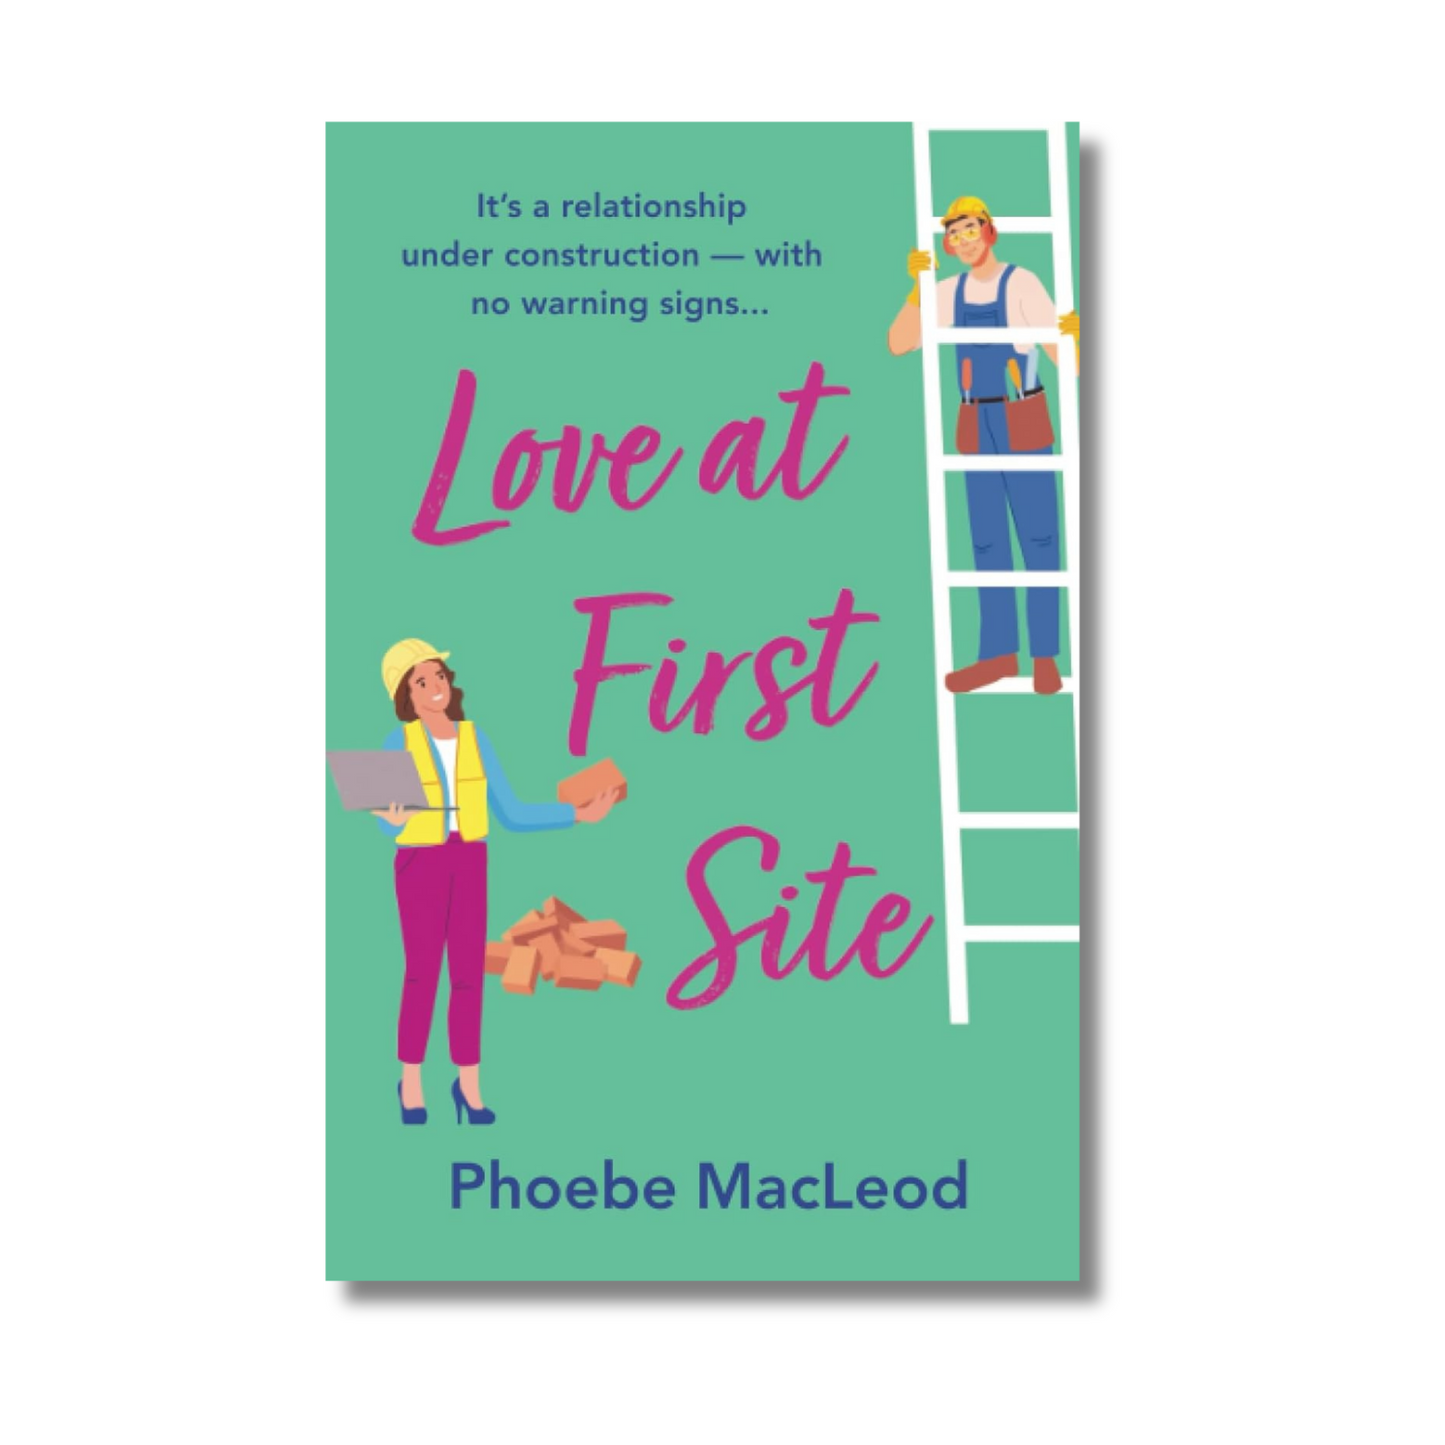 Love at First Site By Phoebe MacLeod (Paperback)